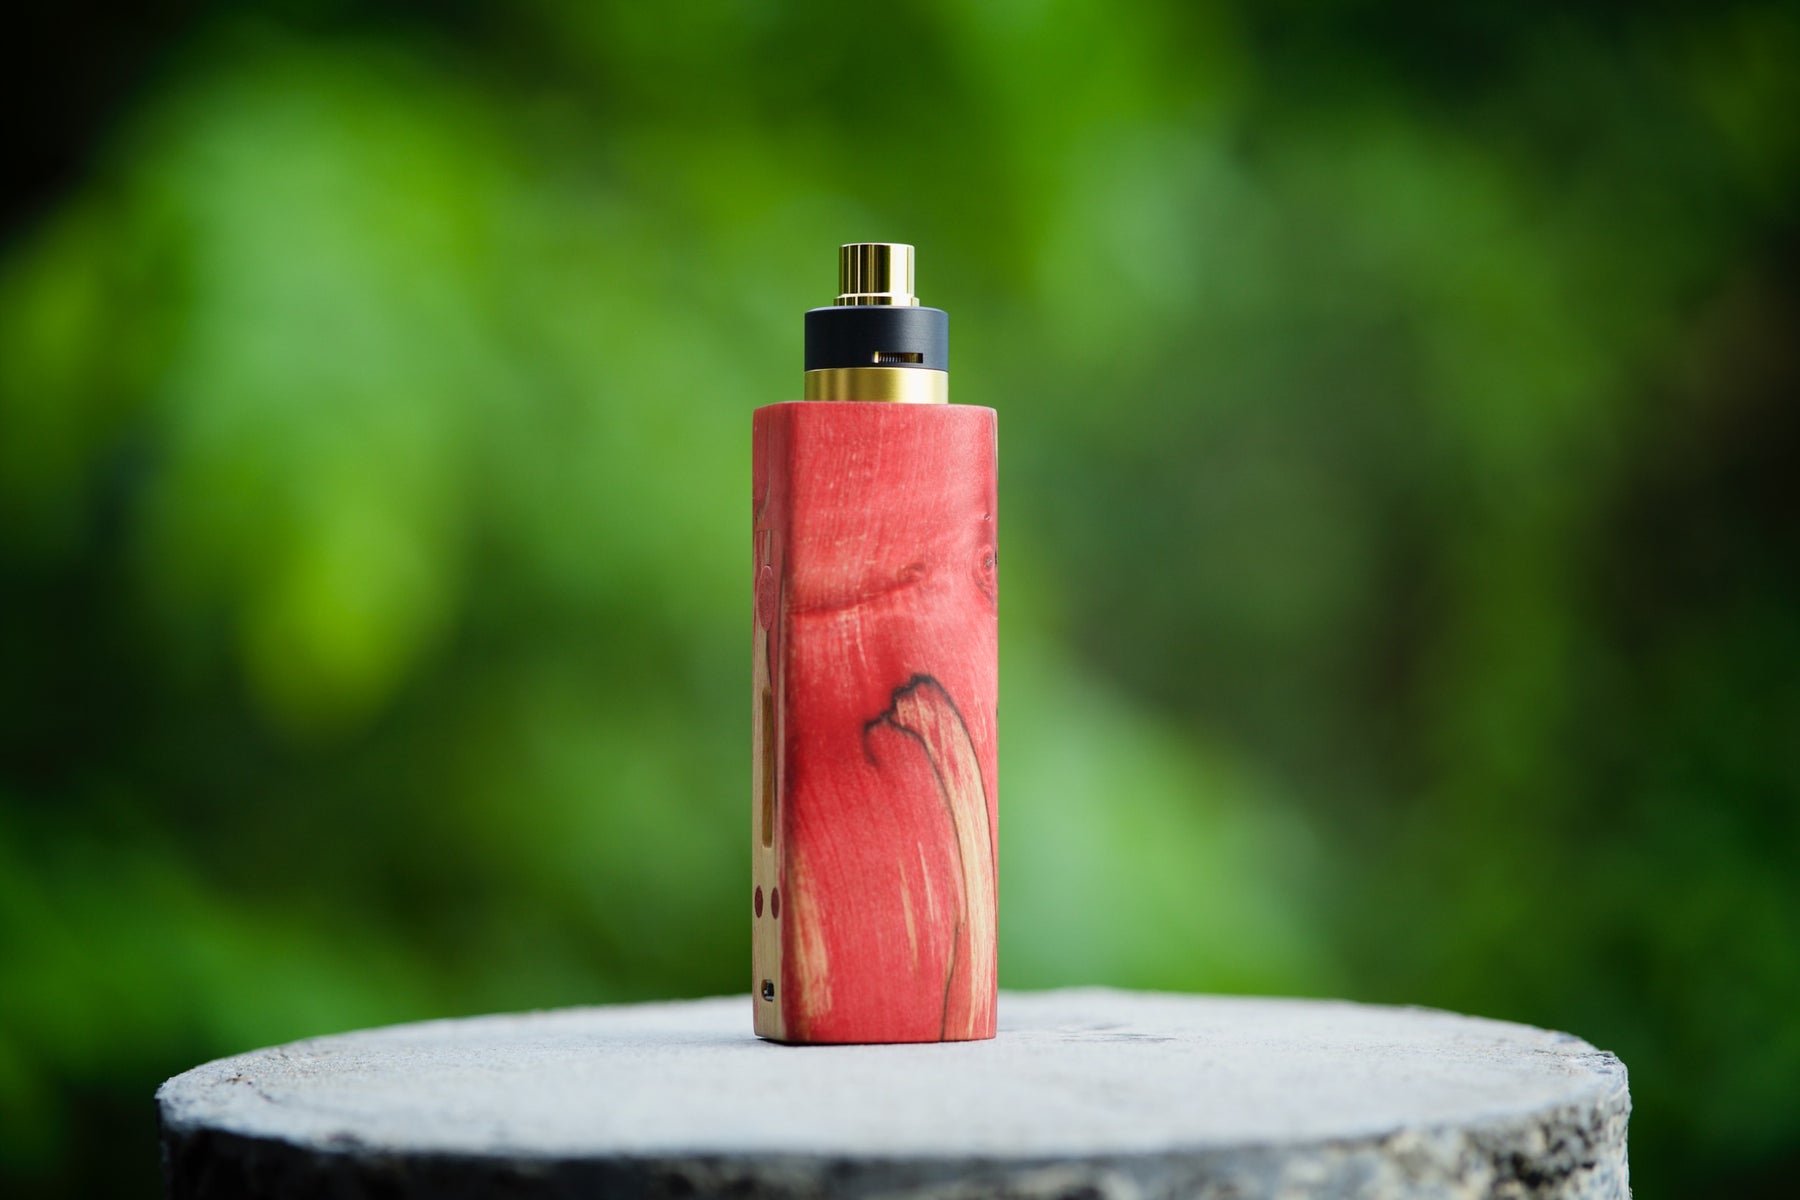 Choosing The Right Battery For Your Vape